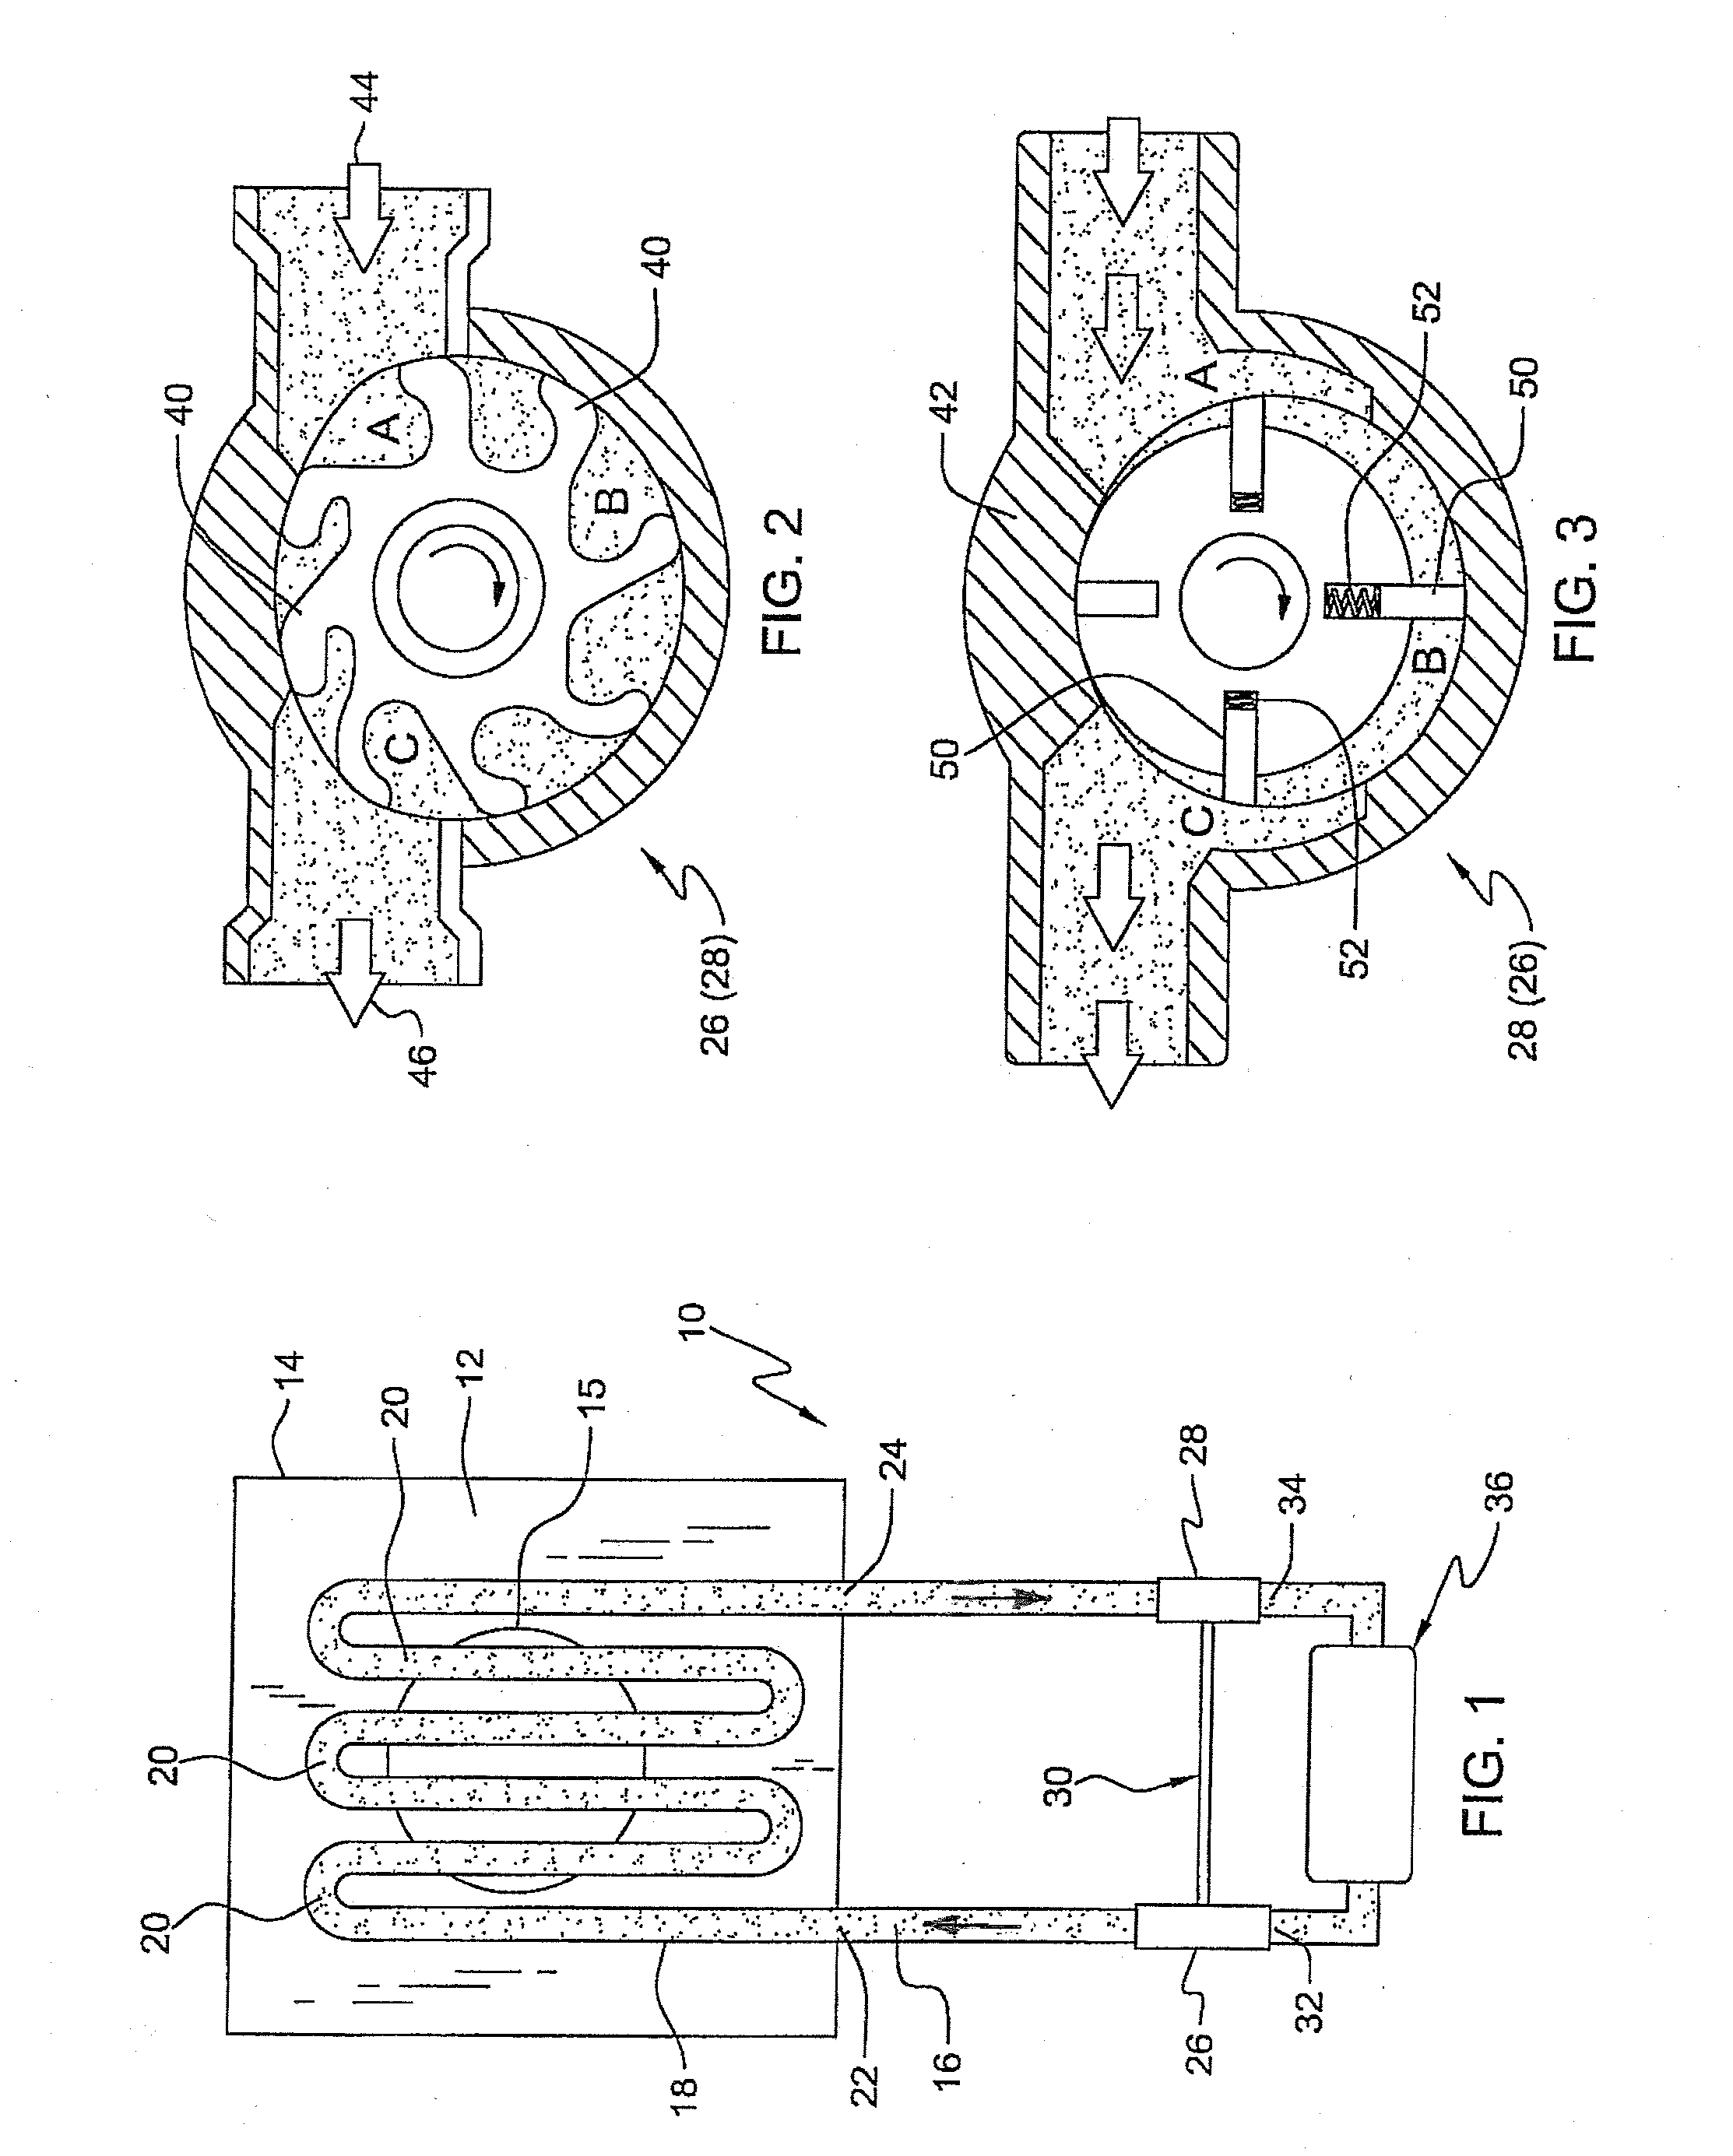 Self-pumping liquid and gas cooling system for the cooling of solar cells and heat-generating elements